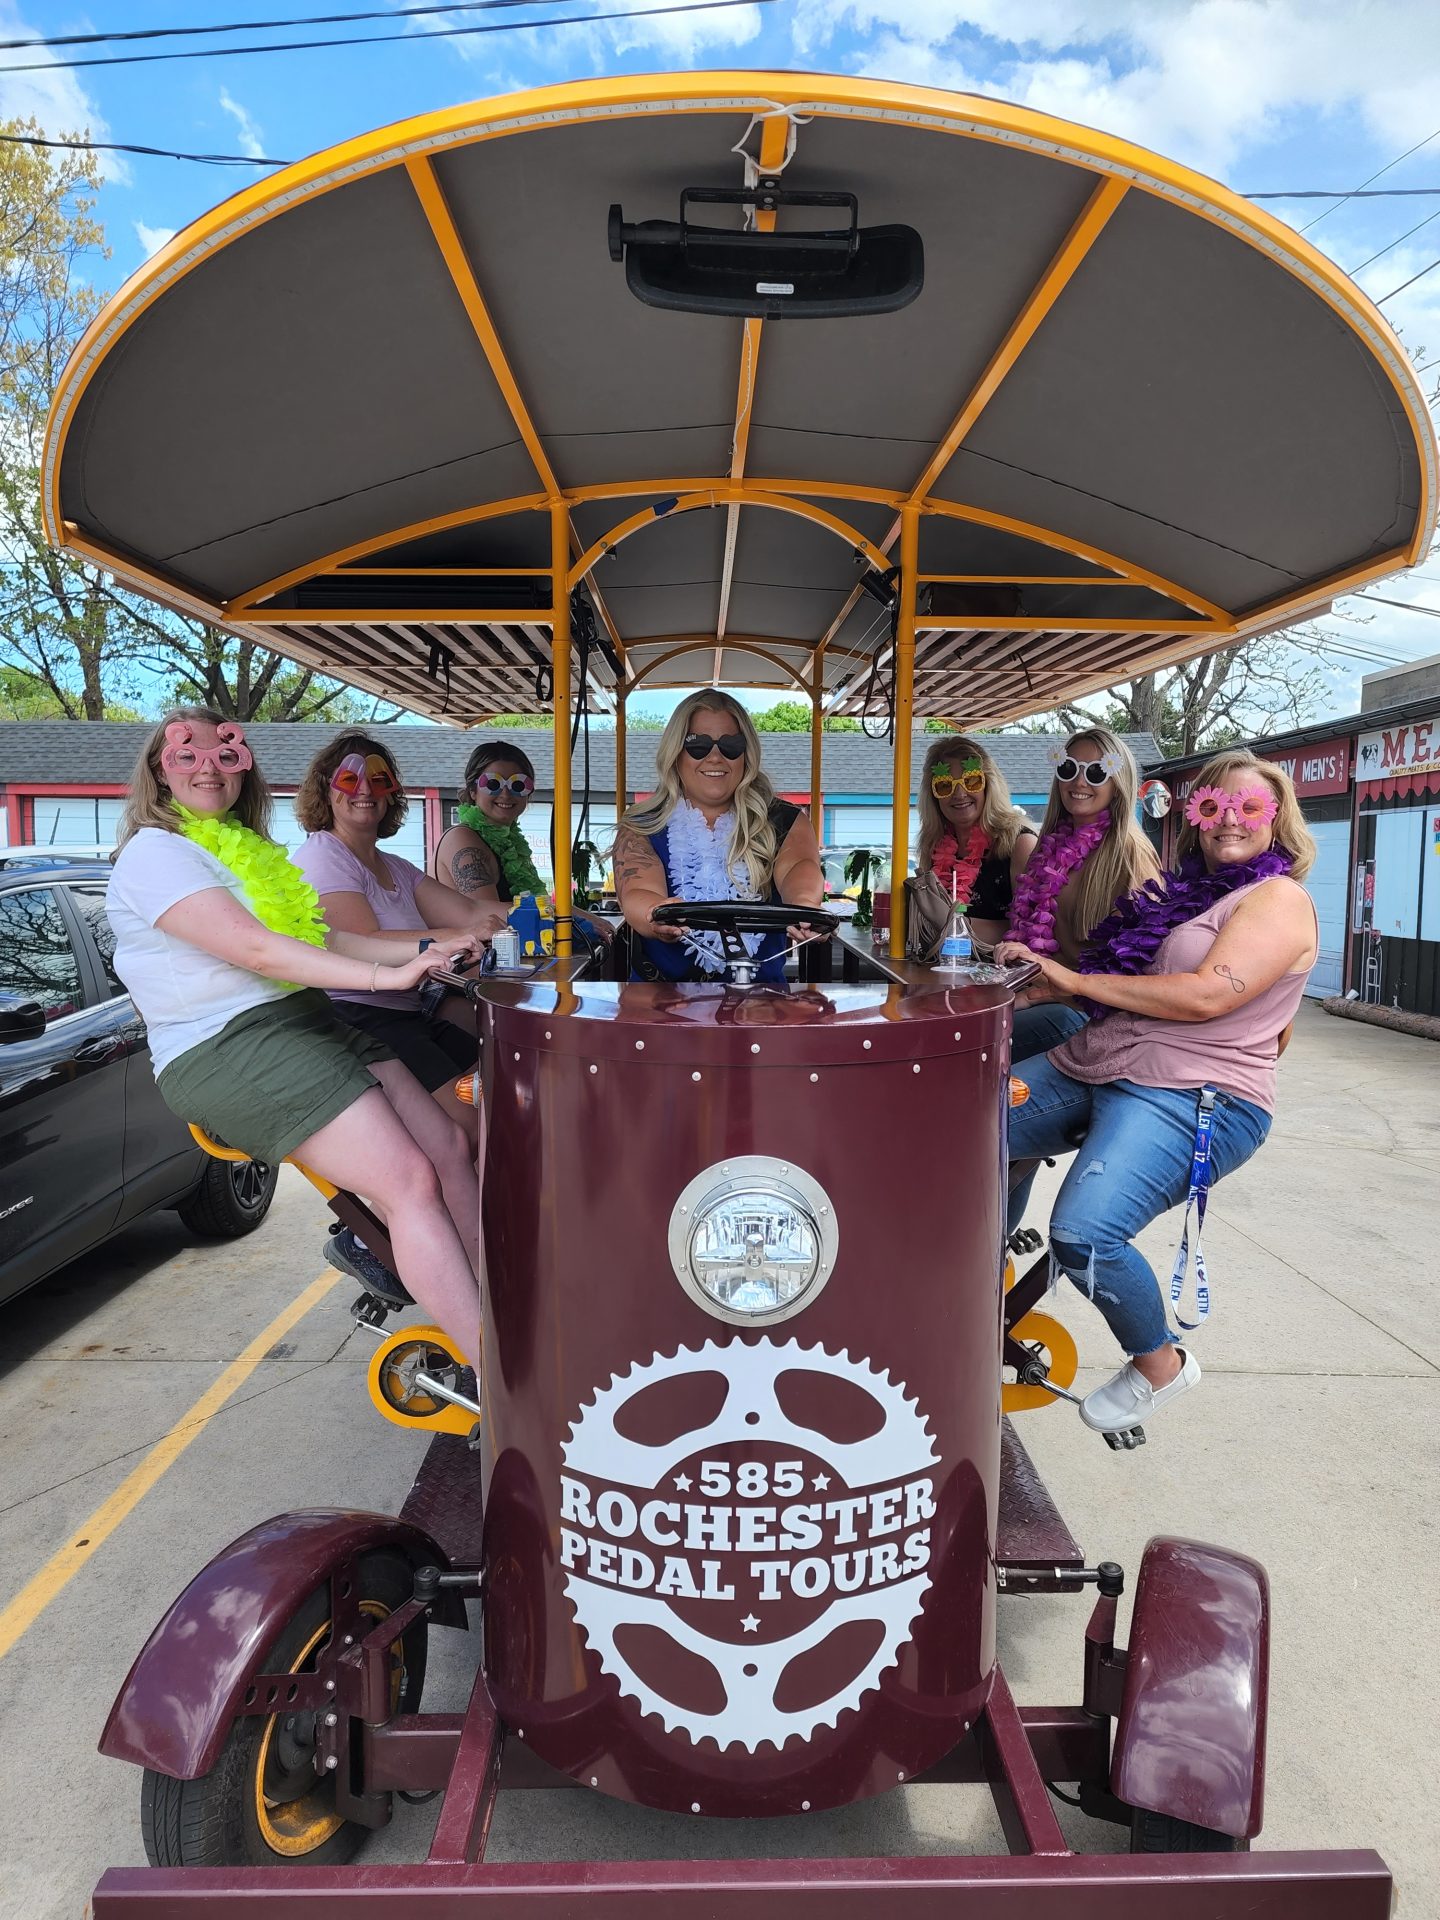 Group of ladies enjoying a birthday celebration party on a pedal pub wearing matching sunglasses